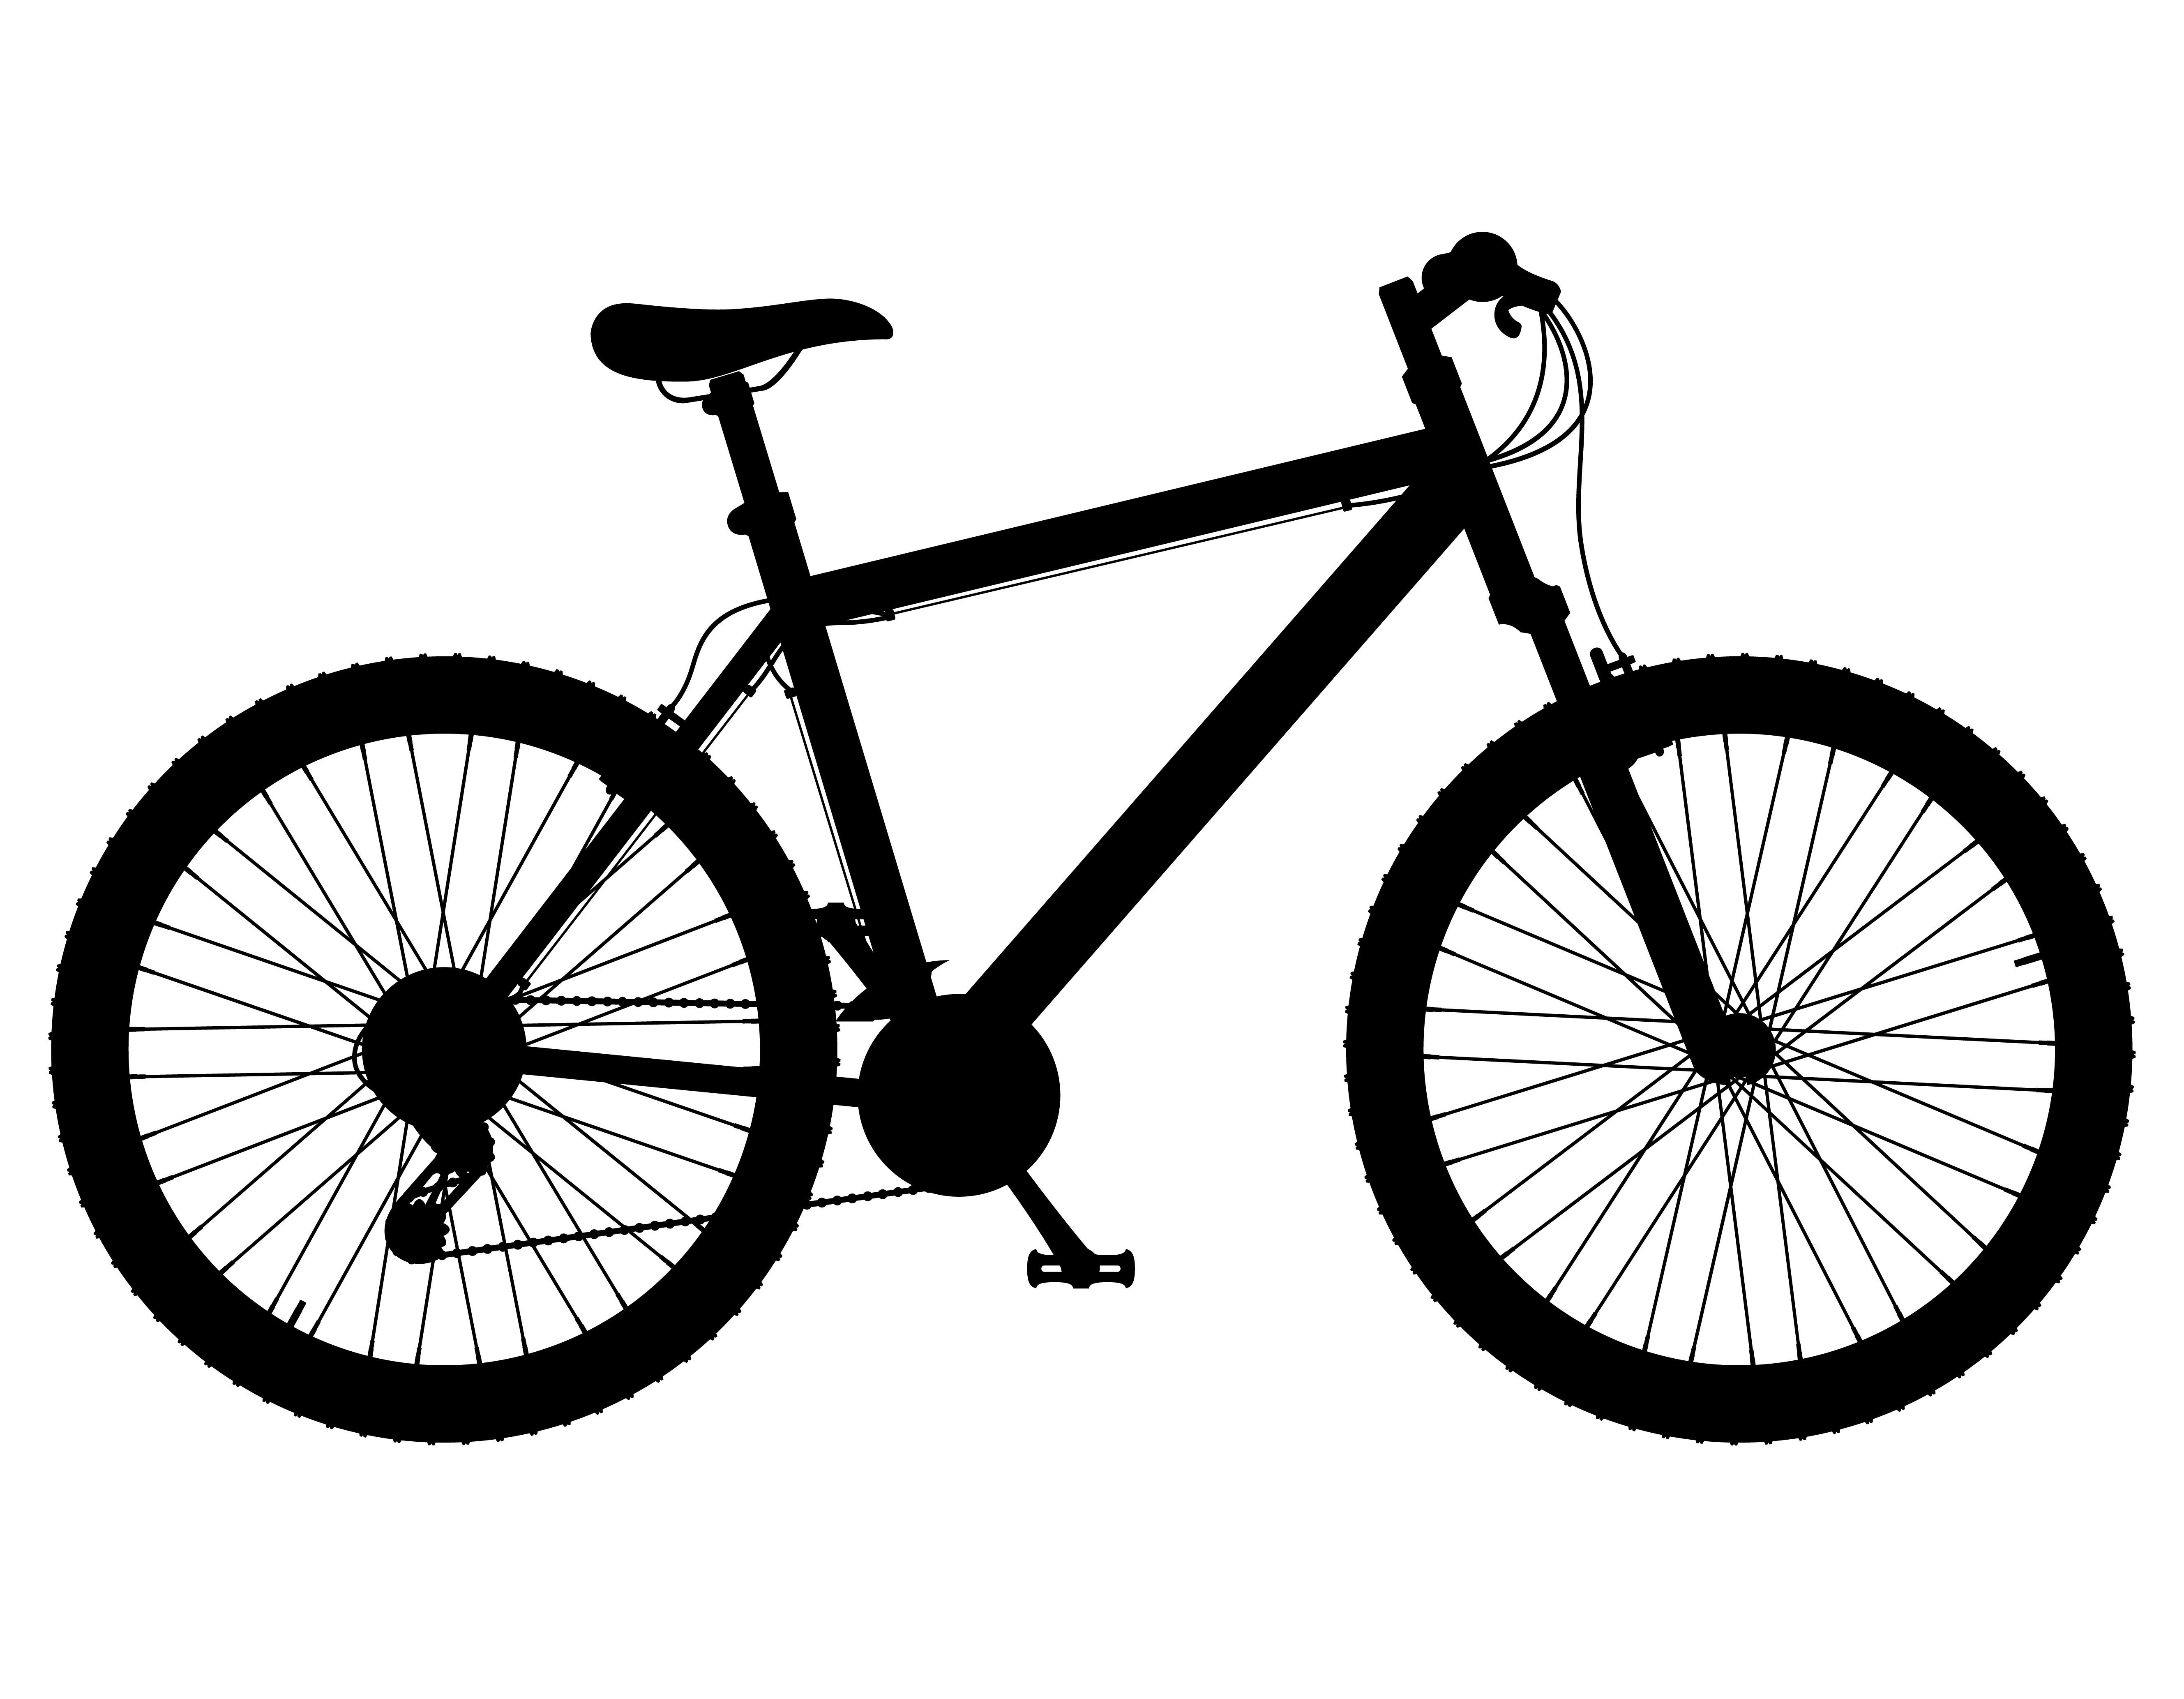 Mountain Bike With Gear Shifting Black Silhouette Vector